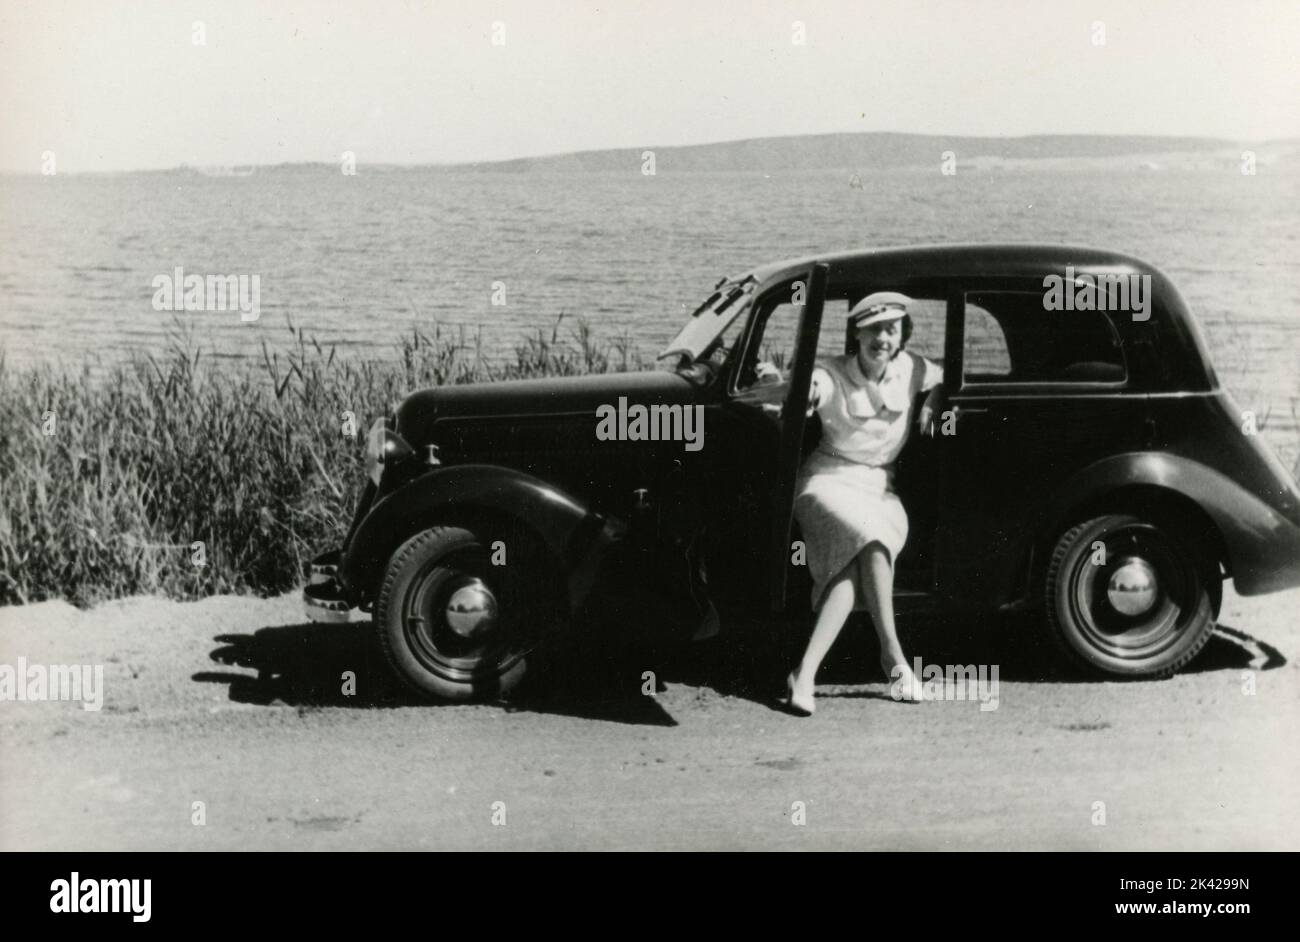 A woman close to the beach with a FIAT 1100 Balilla car, Italy 1940s Stock Photo